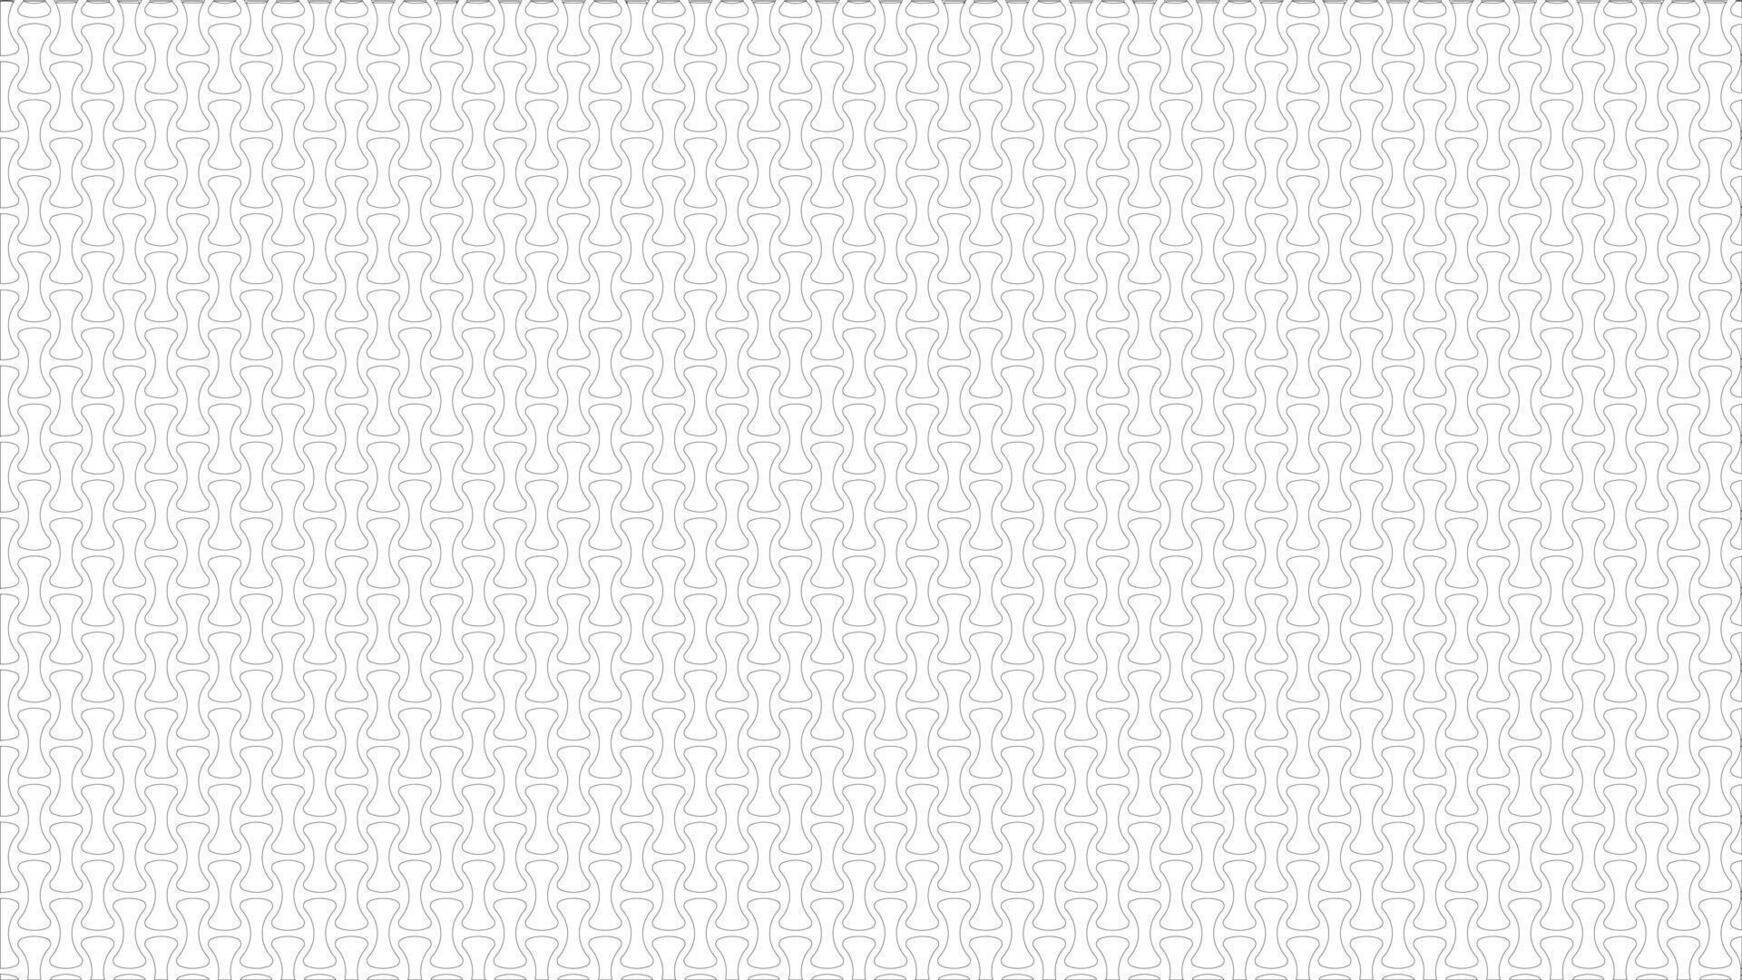 Halftone faded gradient texture. Grunge halftone grit background. White and black sand noise wallpaper. vector